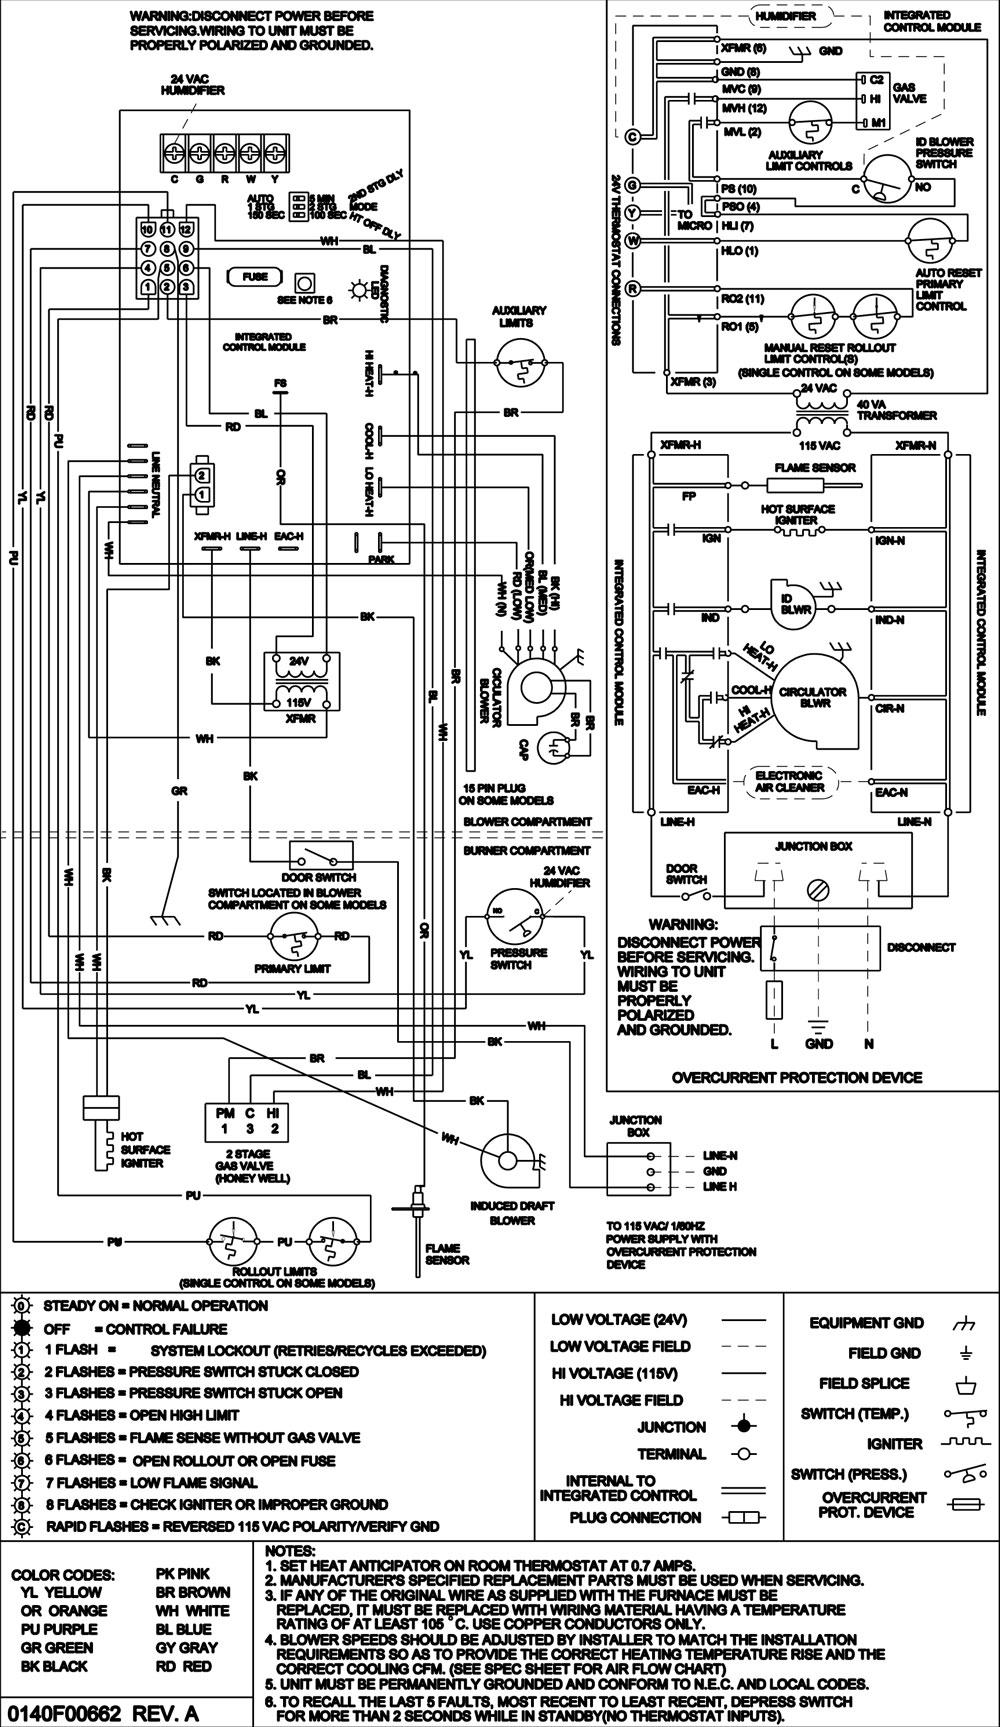 Wiring Diagram Wiring is subject to change. Always refer to the wiring diagram or the Warning unit for the most up-to-date wiring.